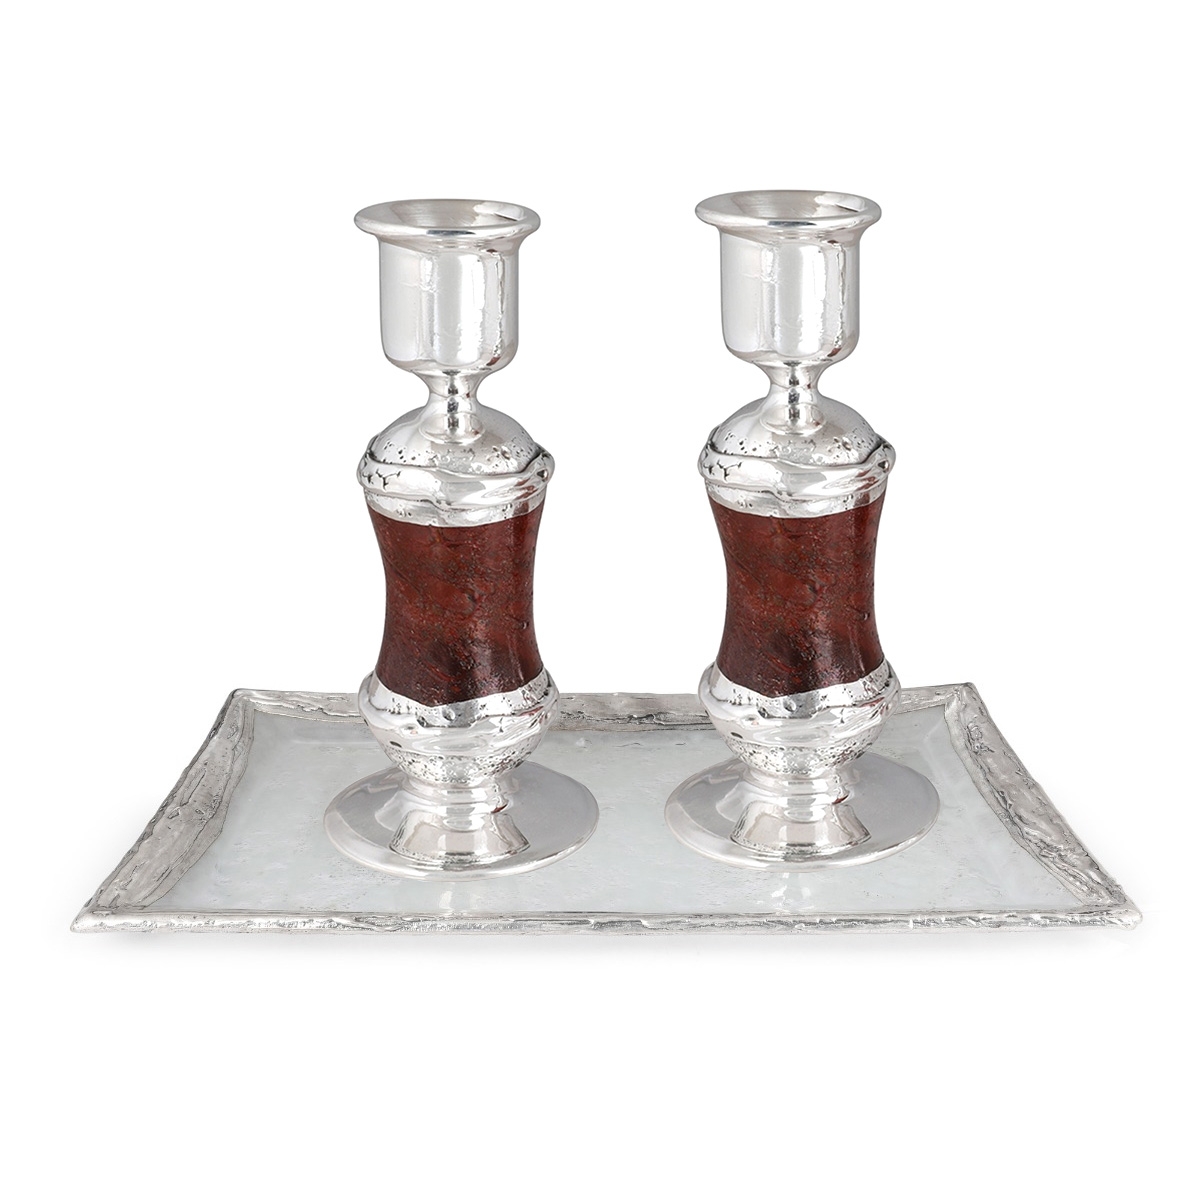 Handmade Red Glass and Sterling Silver-Plated Shabbat Candlesticks - 1